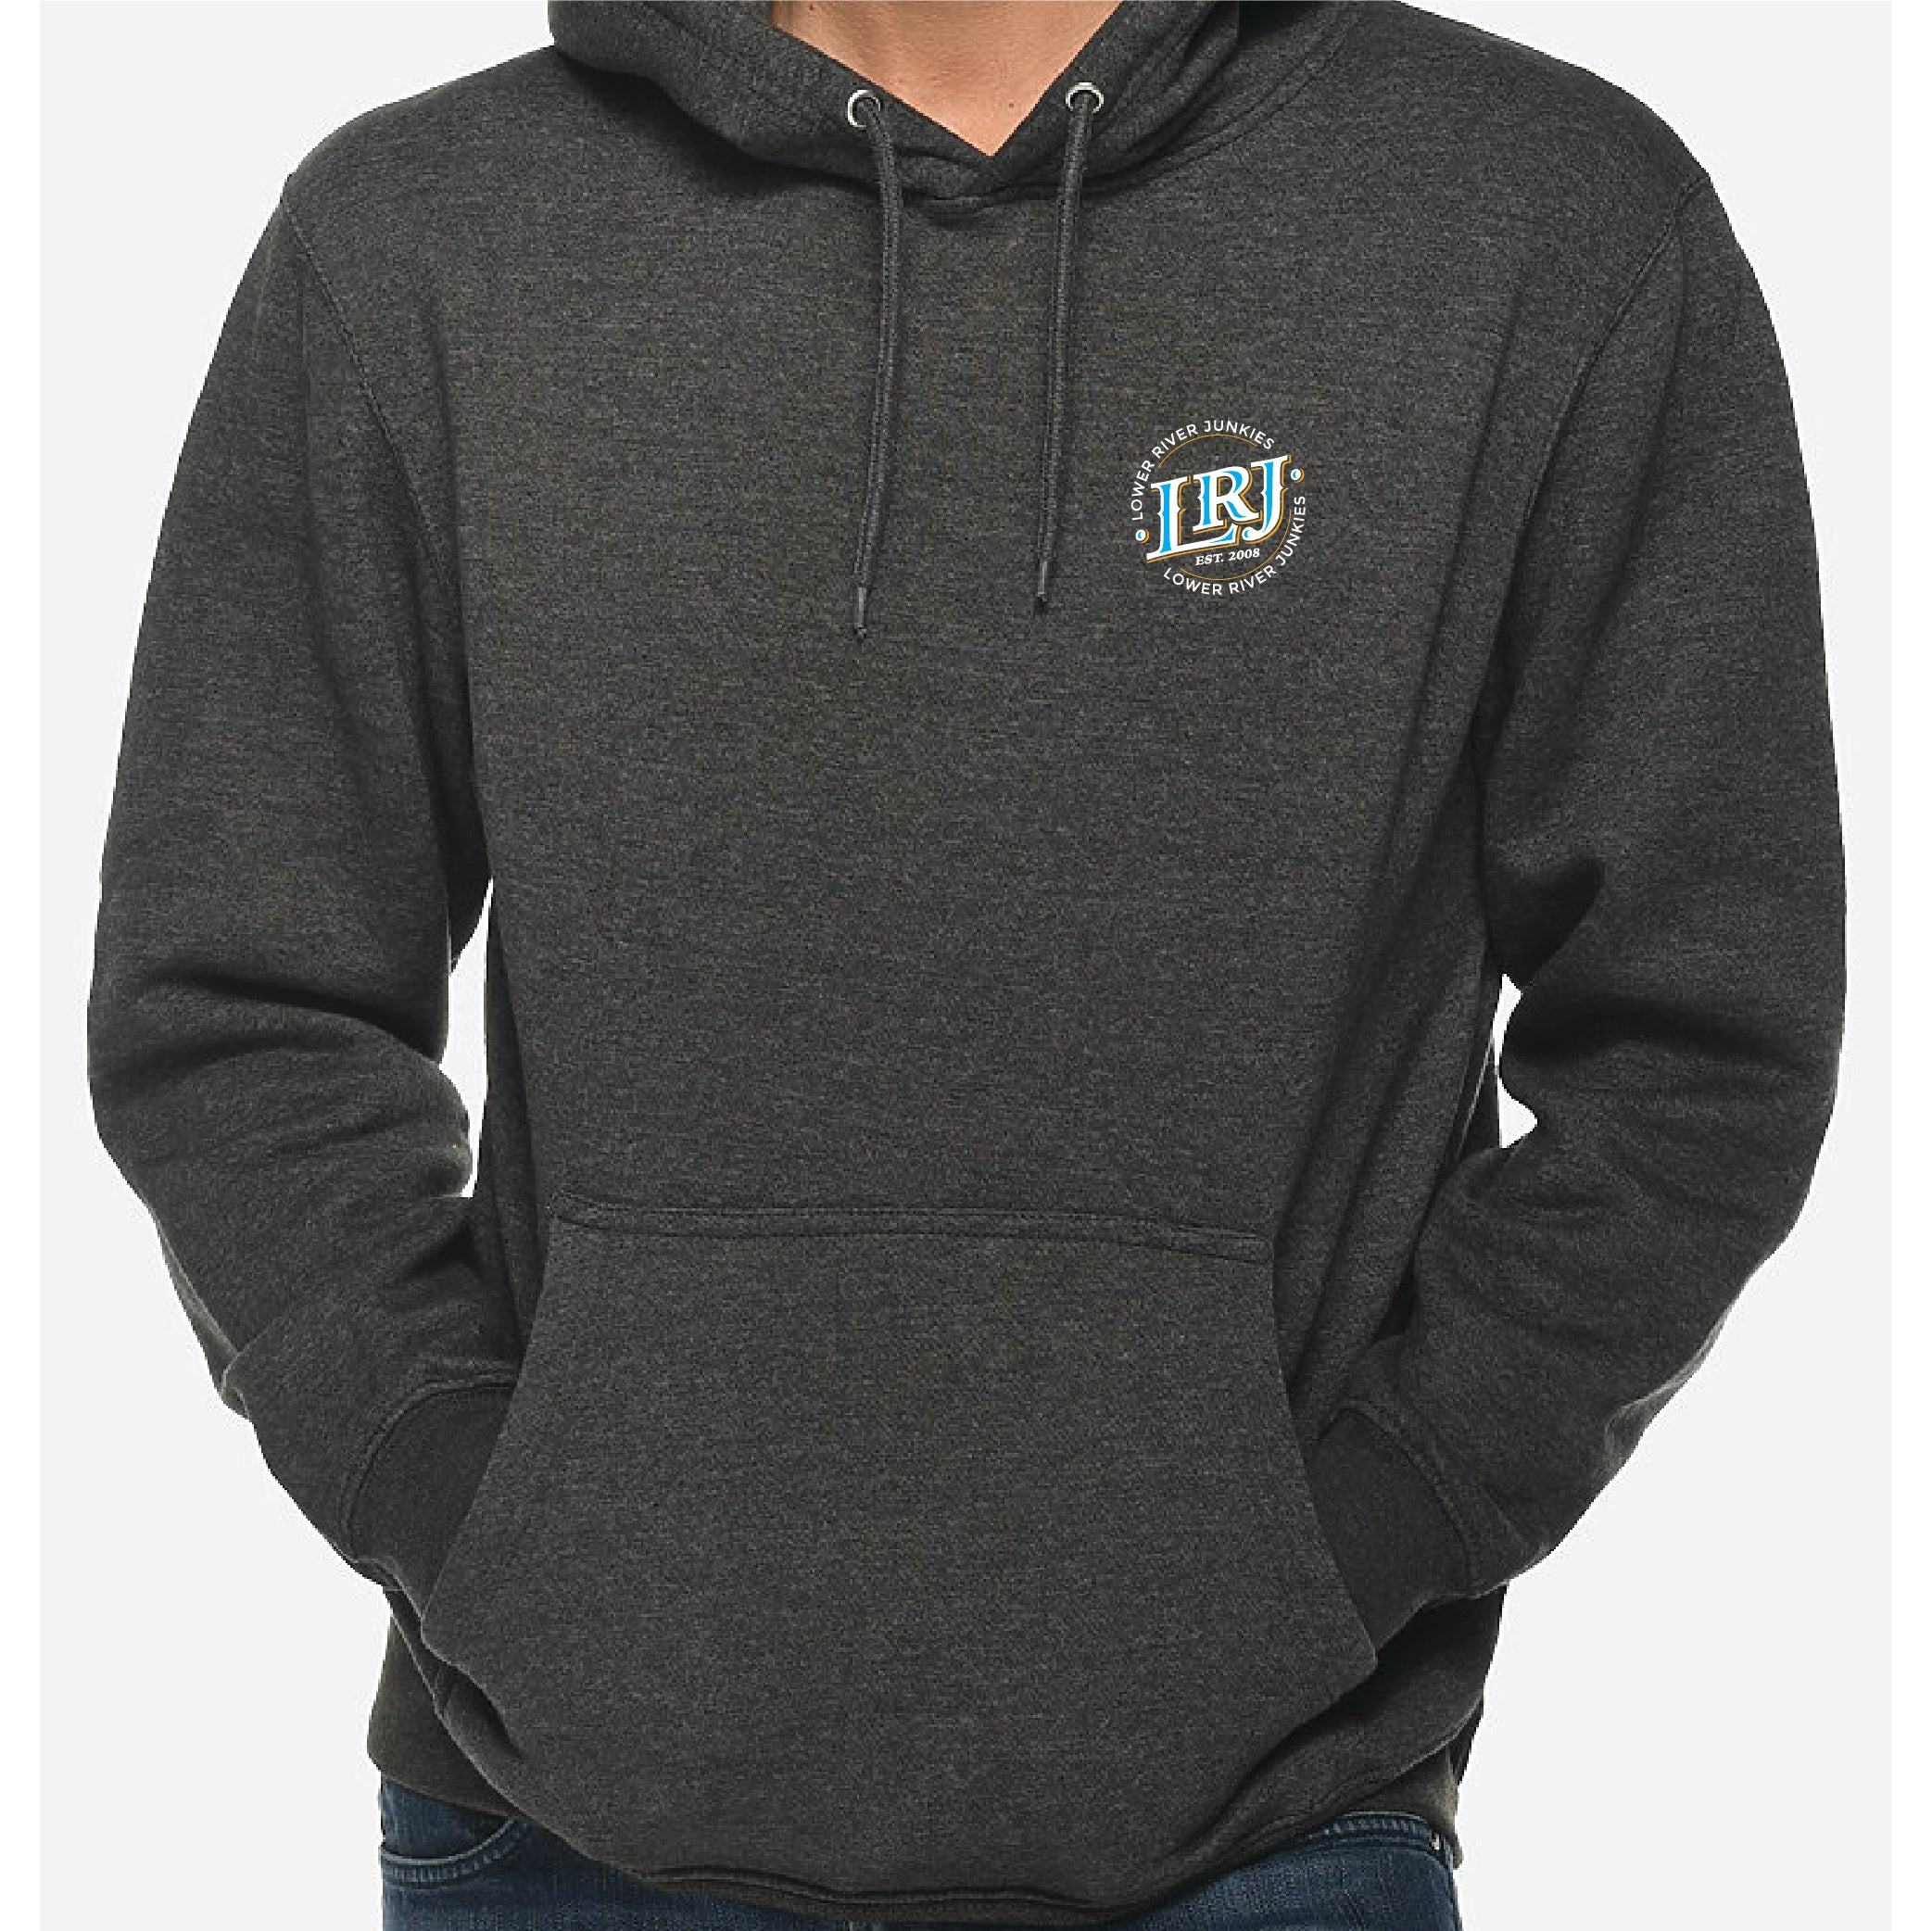 LRJ Boat Life Unisex Pullover Hoodie - Charcoal Heather/Orange